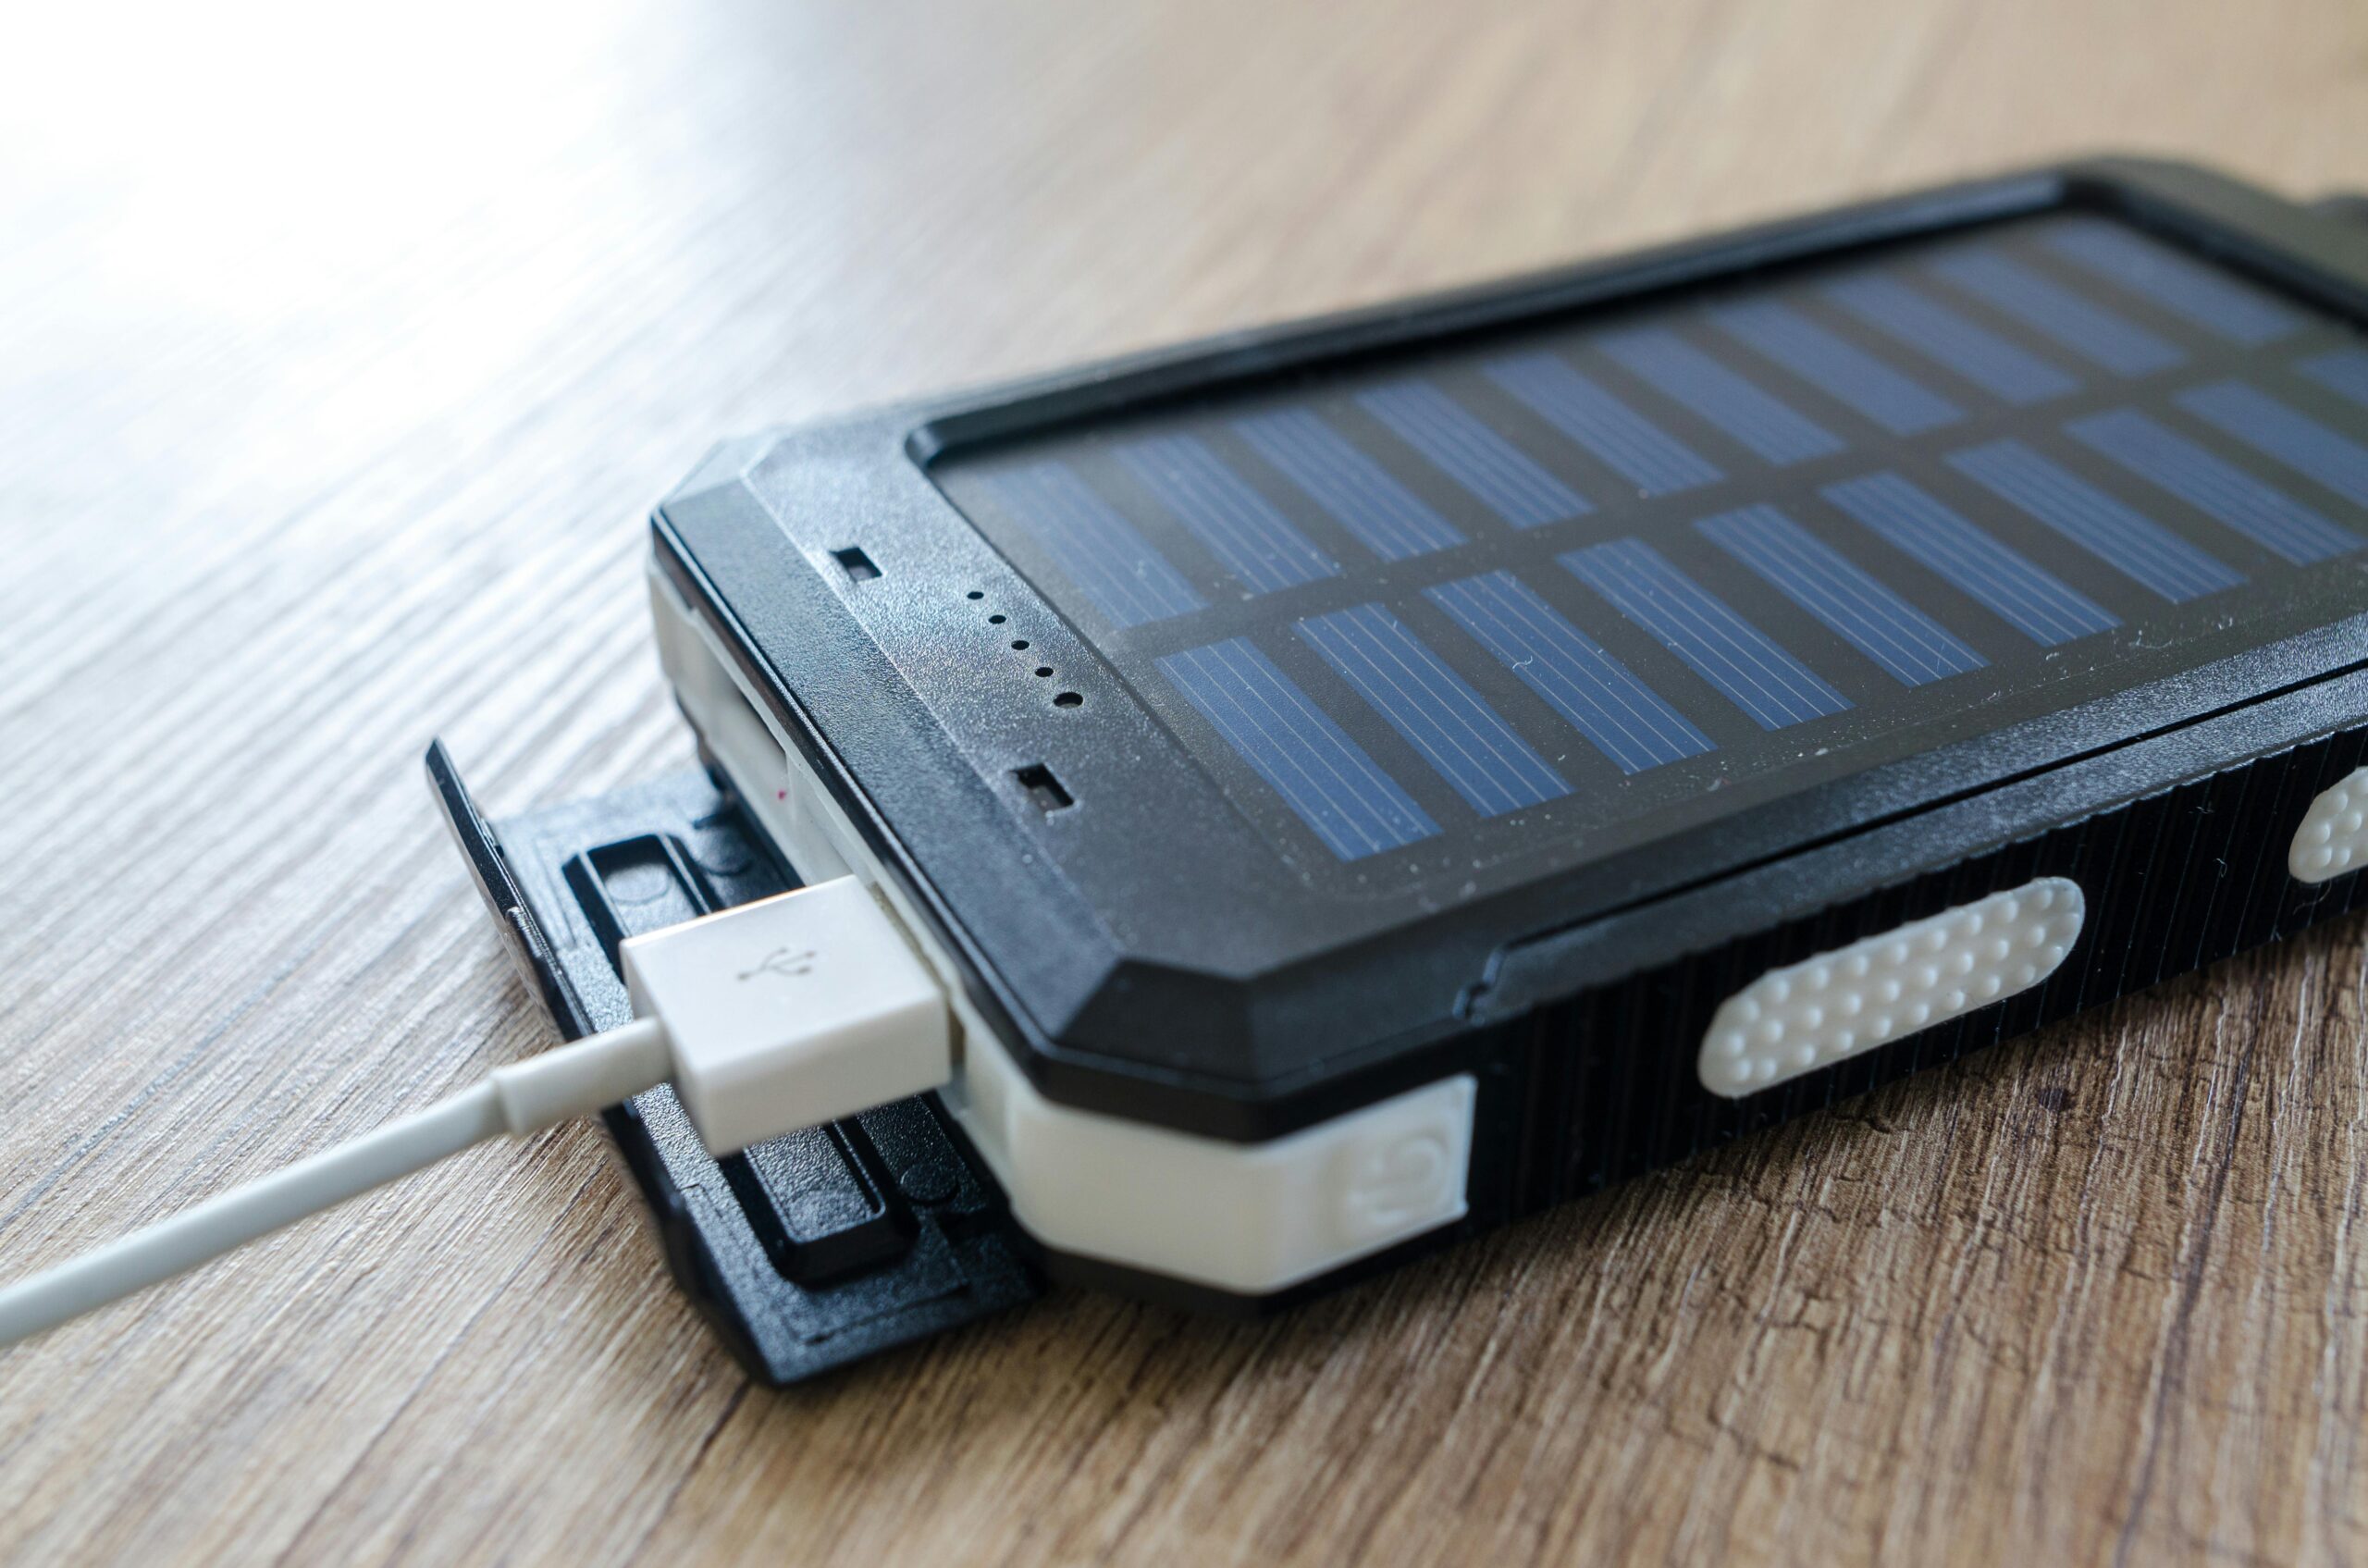 Solar-powered portable phone chargers are a great eco-friendly gift option which use a free energy source.